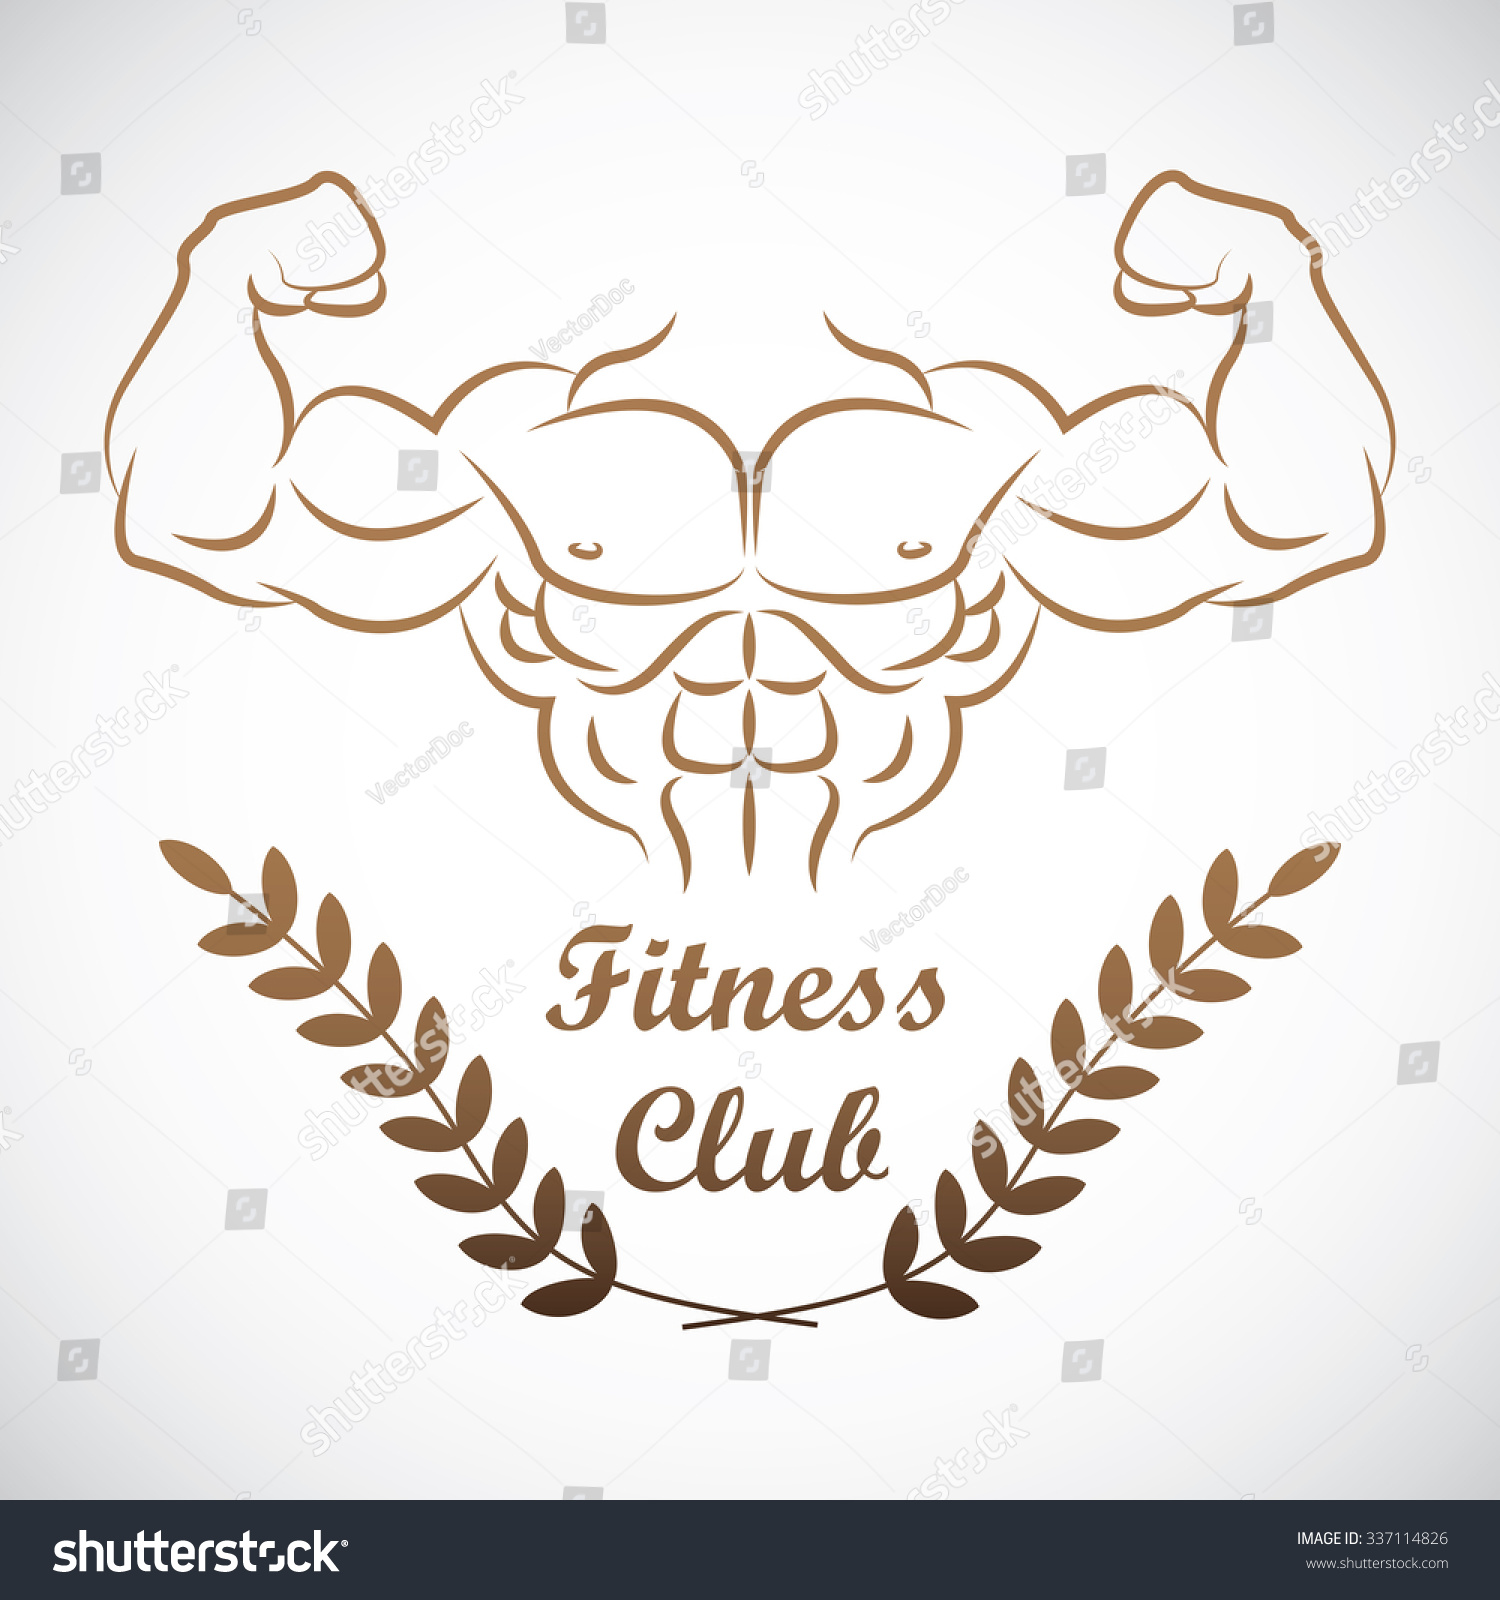 Muscle Man Outline Fitness Club Gym Stock Vector Royalty Free